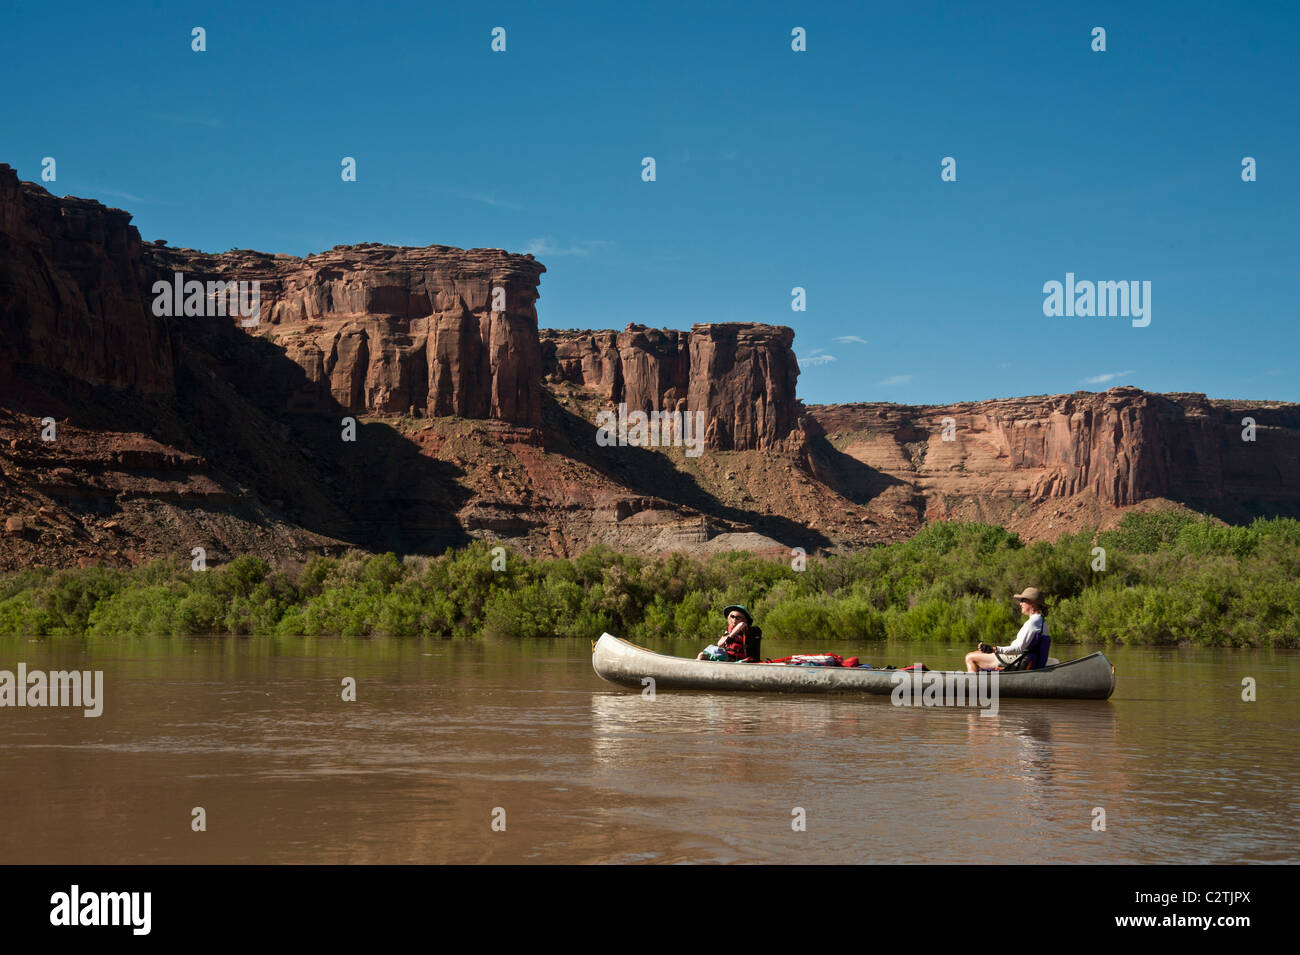 Mother and daughter canoeing on a calm blue river in the desert country of Utah Stock Photo